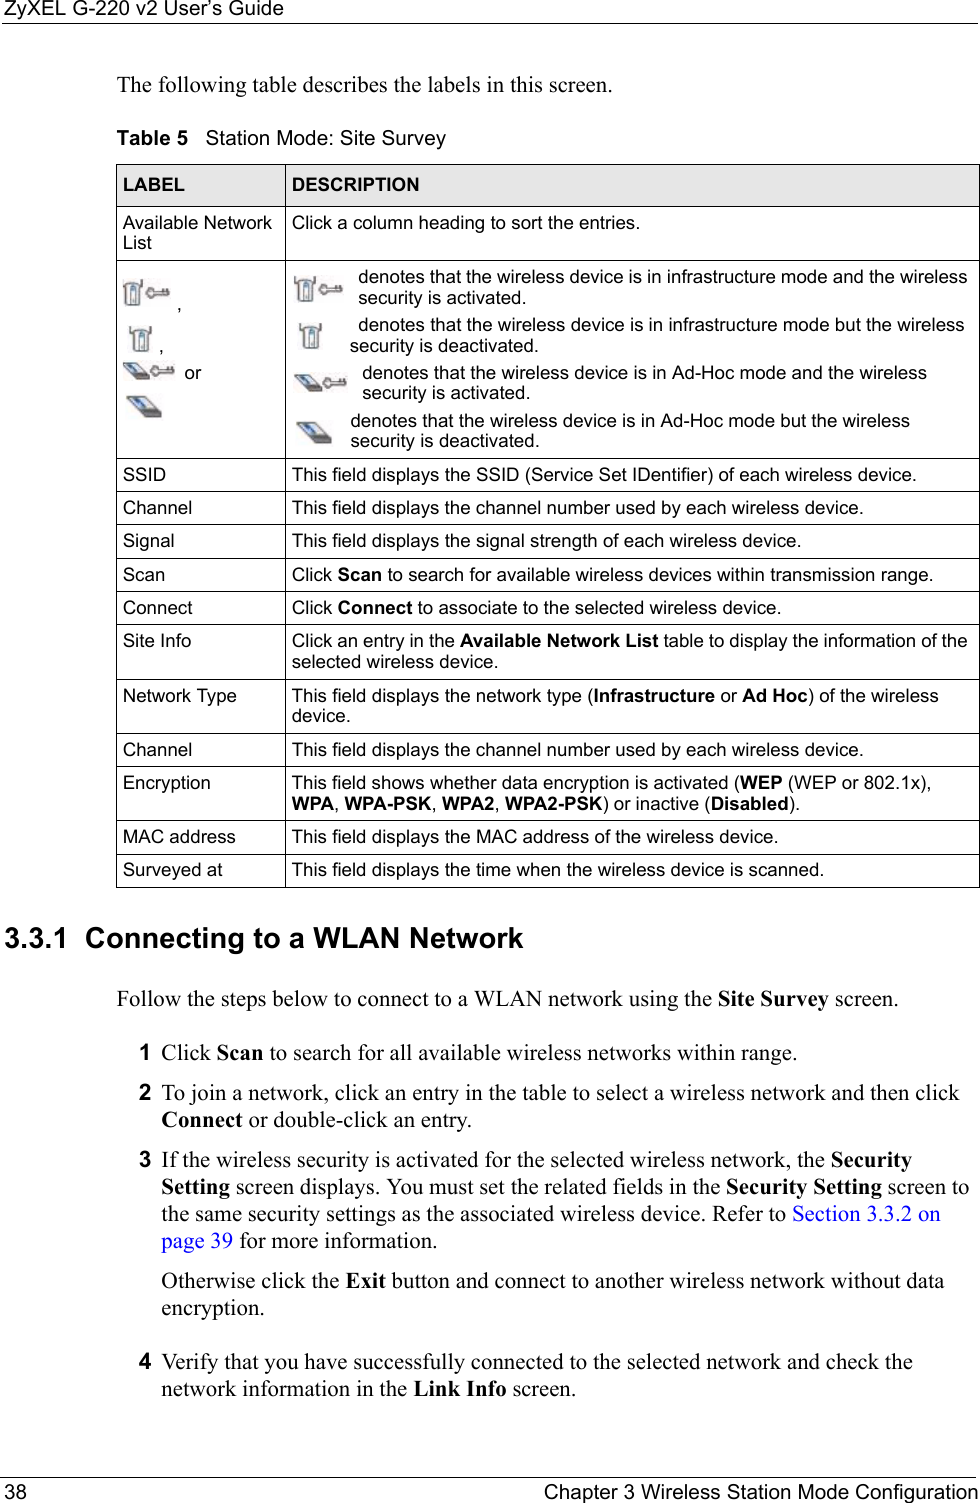 ZyXEL G-220 v2 User’s Guide38 Chapter 3 Wireless Station Mode ConfigurationThe following table describes the labels in this screen. 3.3.1  Connecting to a WLAN NetworkFollow the steps below to connect to a WLAN network using the Site Survey screen.1Click Scan to search for all available wireless networks within range.2To join a network, click an entry in the table to select a wireless network and then click Connect or double-click an entry. 3If the wireless security is activated for the selected wireless network, the Security Setting screen displays. You must set the related fields in the Security Setting screen to the same security settings as the associated wireless device. Refer to Section 3.3.2 on page 39 for more information.Otherwise click the Exit button and connect to another wireless network without data encryption.4Verify that you have successfully connected to the selected network and check the network information in the Link Info screen.Table 5   Station Mode: Site Survey LABEL DESCRIPTIONAvailable Network ListClick a column heading to sort the entries.,, ordenotes that the wireless device is in infrastructure mode and the wireless security is activated.denotes that the wireless device is in infrastructure mode but the wireless security is deactivated.denotes that the wireless device is in Ad-Hoc mode and the wireless security is activated.denotes that the wireless device is in Ad-Hoc mode but the wireless security is deactivated.SSID This field displays the SSID (Service Set IDentifier) of each wireless device.Channel This field displays the channel number used by each wireless device.Signal This field displays the signal strength of each wireless device.Scan Click Scan to search for available wireless devices within transmission range.Connect Click Connect to associate to the selected wireless device.Site Info Click an entry in the Available Network List table to display the information of the selected wireless device.Network Type  This field displays the network type (Infrastructure or Ad Hoc) of the wireless device.Channel This field displays the channel number used by each wireless device.Encryption This field shows whether data encryption is activated (WEP (WEP or 802.1x), WPA, WPA-PSK, WPA2, WPA2-PSK) or inactive (Disabled).MAC address  This field displays the MAC address of the wireless device.Surveyed at  This field displays the time when the wireless device is scanned.